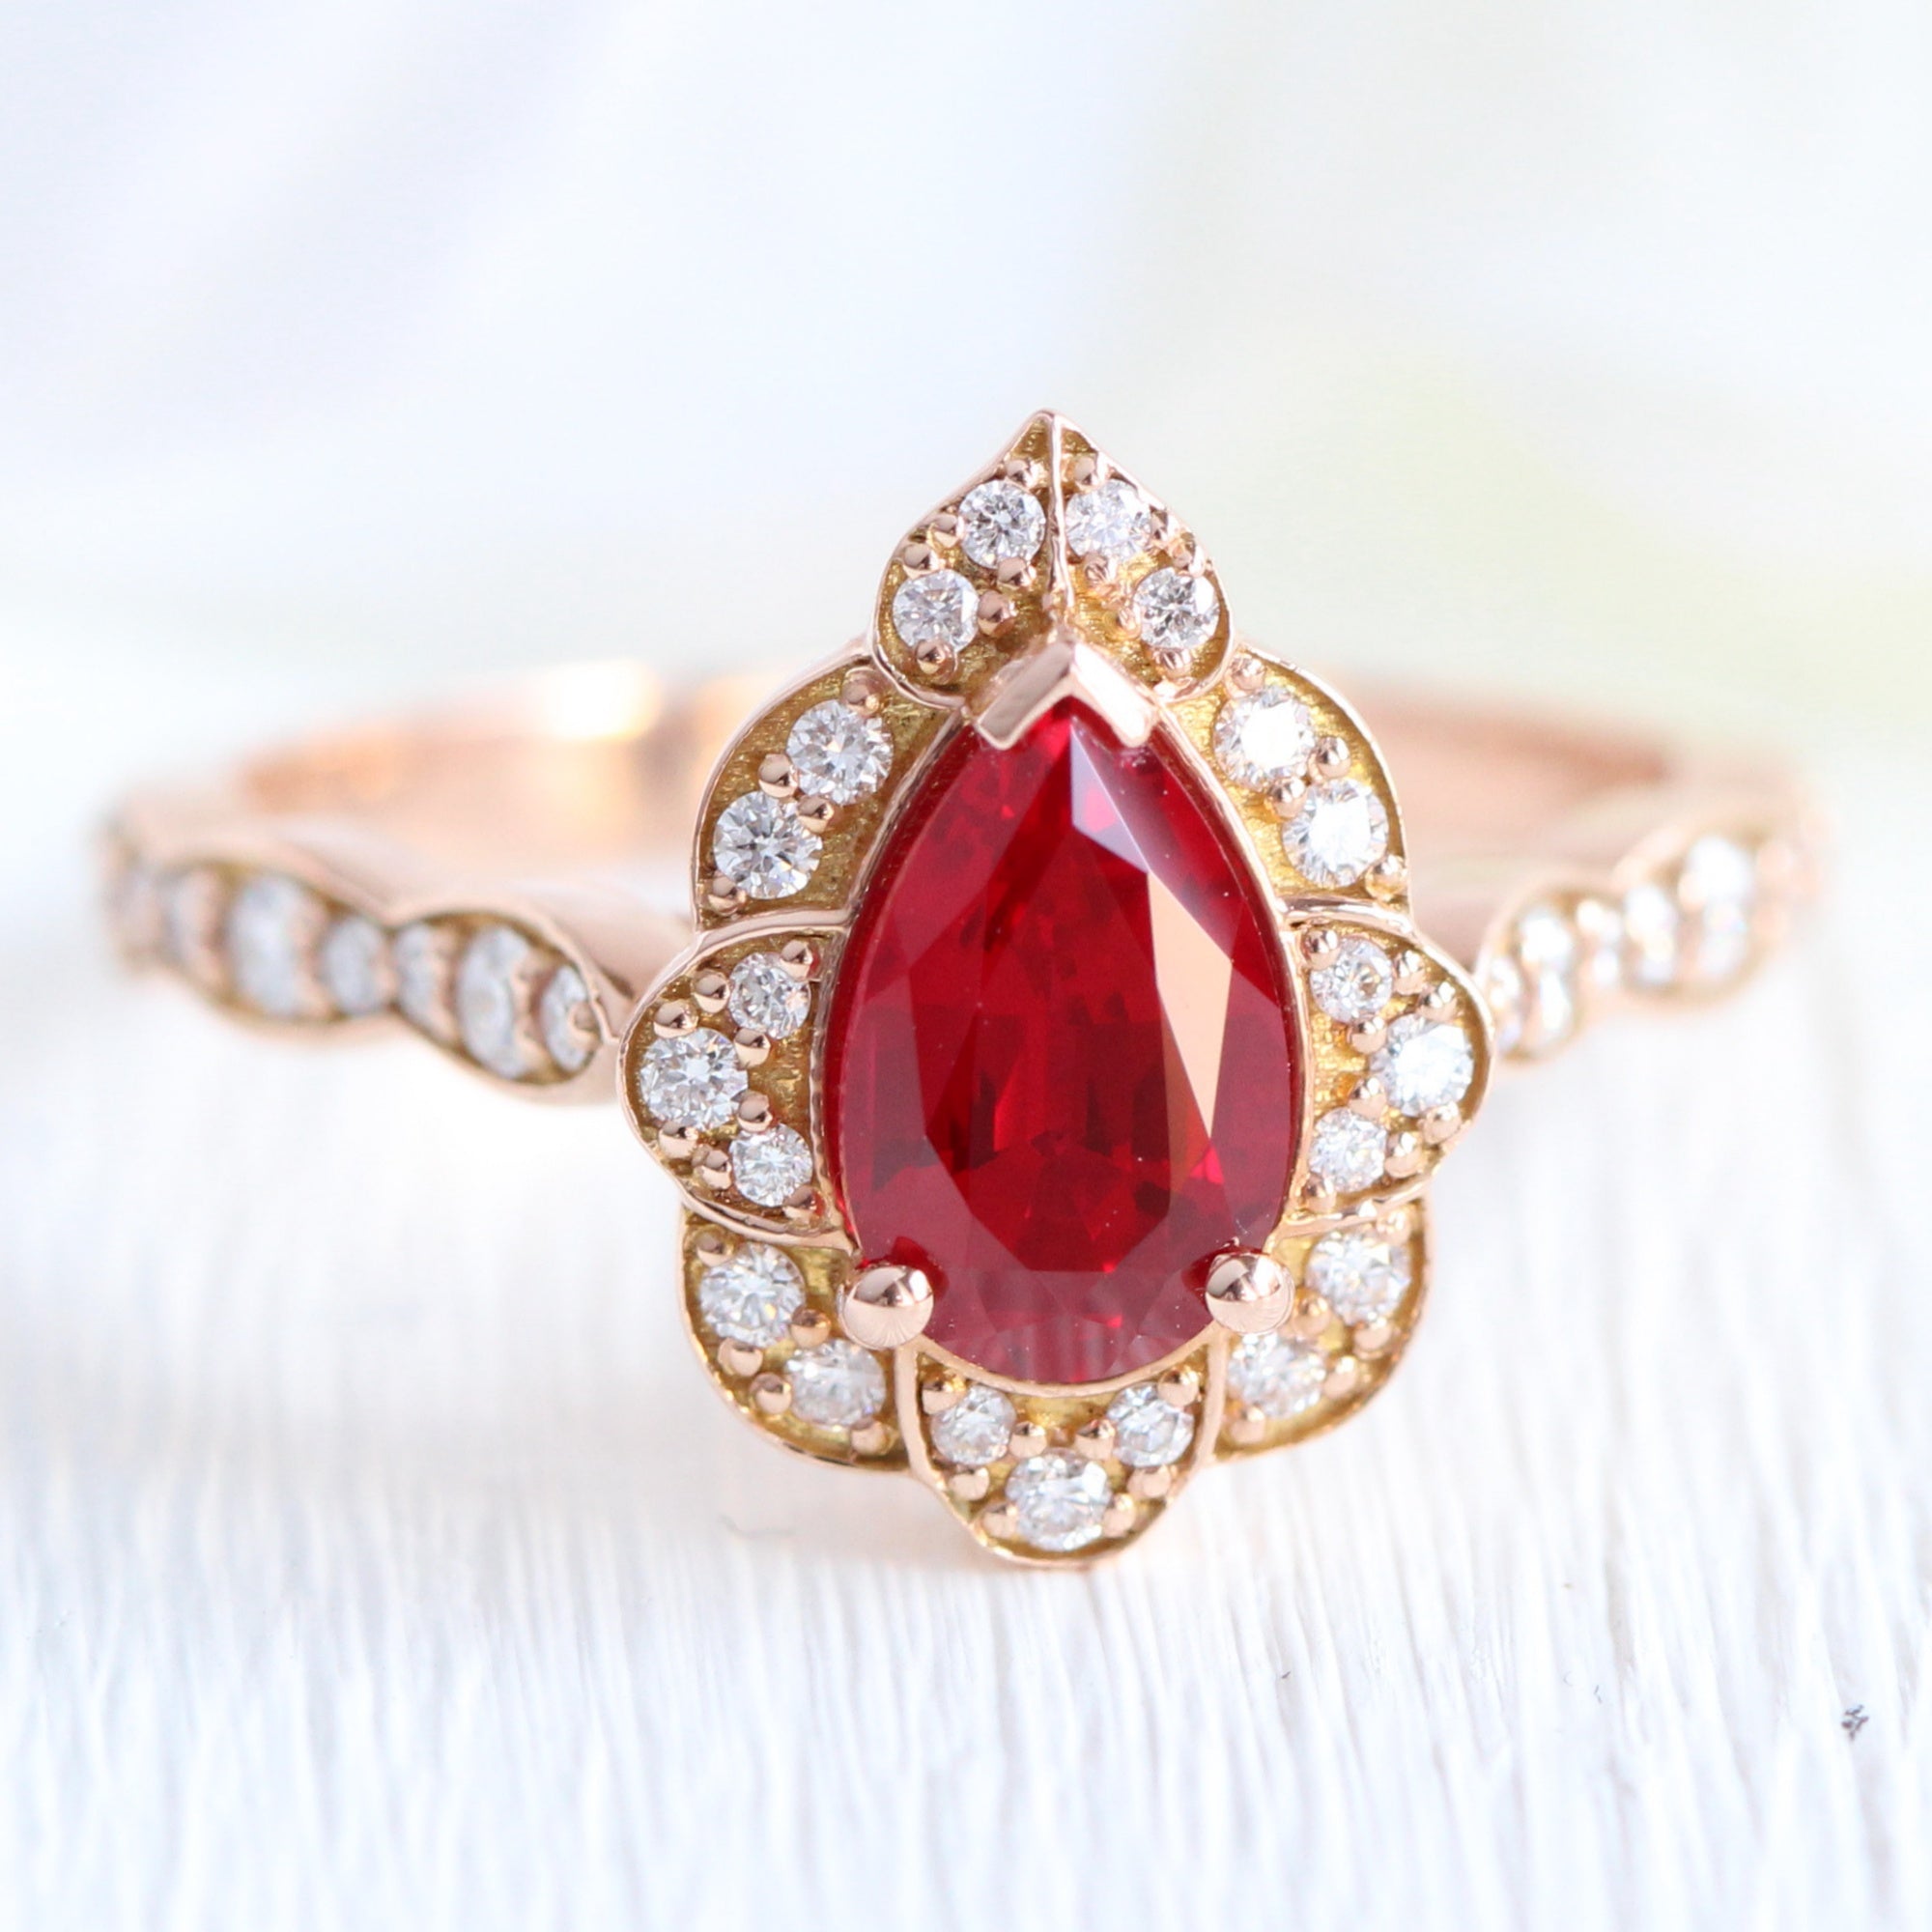 Get A Red Ruby Ring Now At An Affordable price